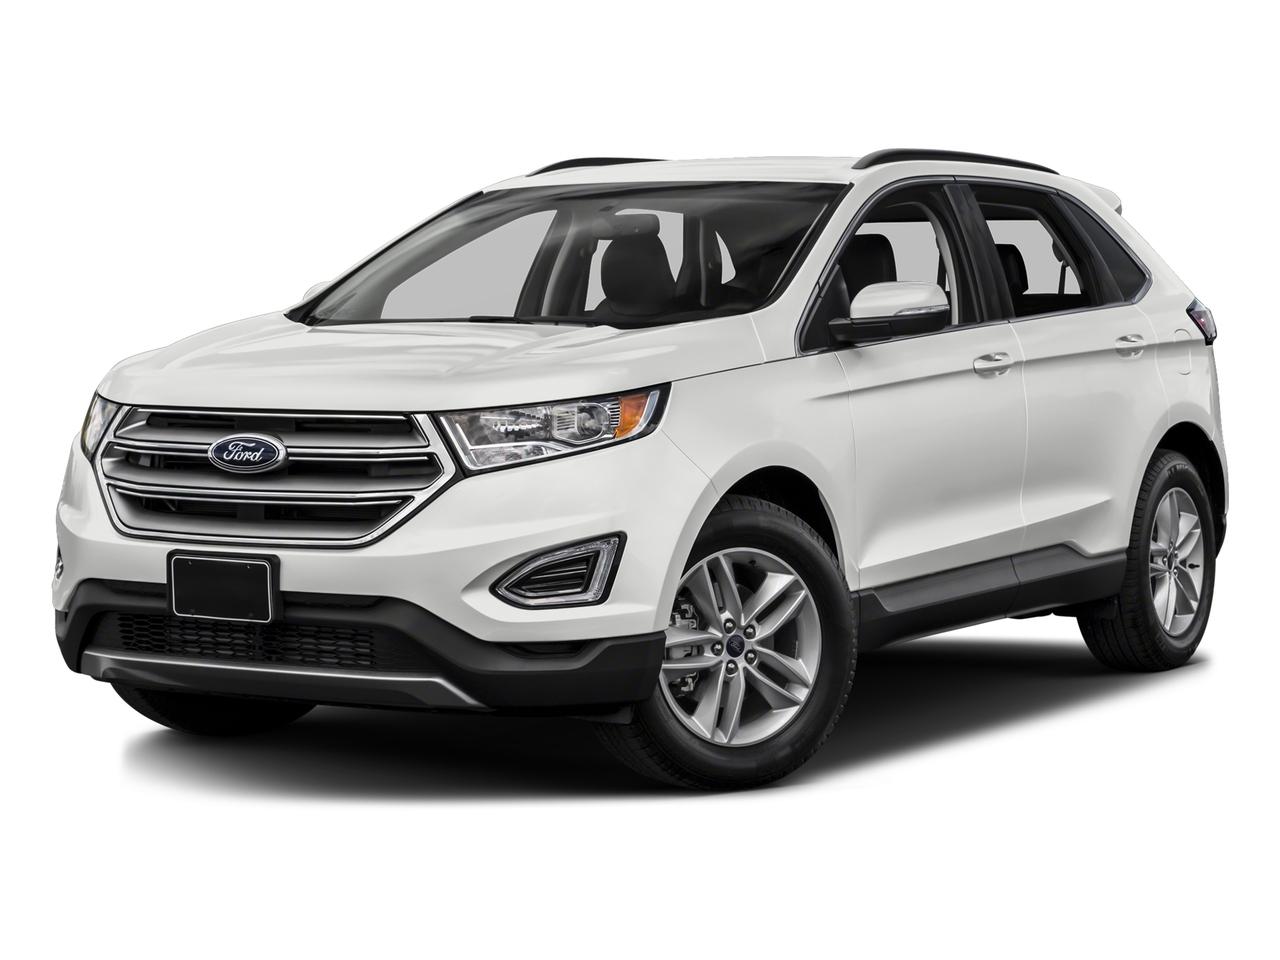 2017 Ford Edge Vehicle Photo in Pilot Point, TX 76258-6053